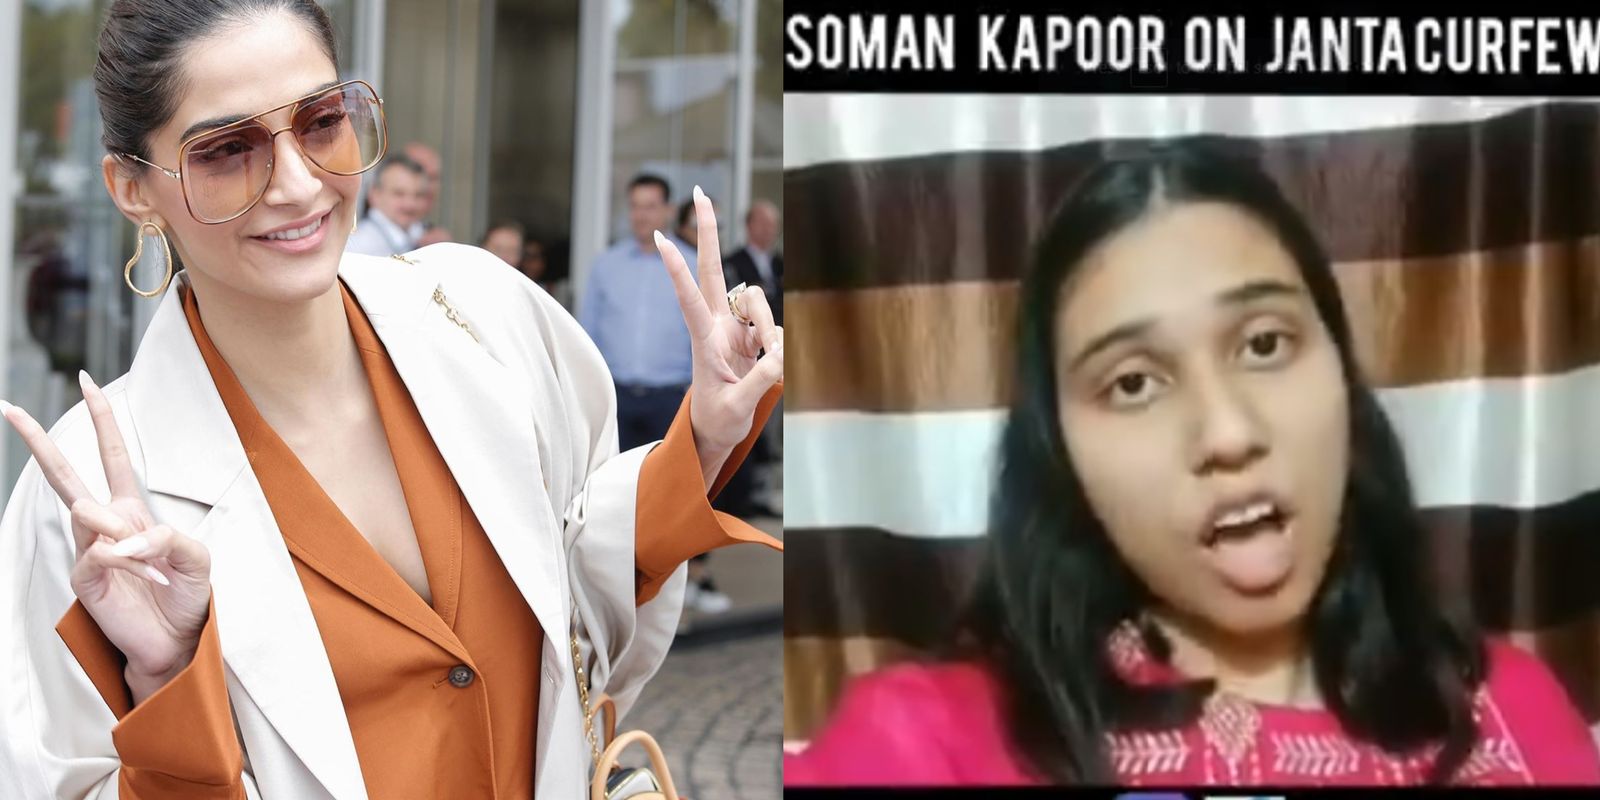 Sonam Kapoor Shares Viral Video That Mocks Her Reaction To Janata Curfew: Rhea Kapoor Imitates My Accent Much Better